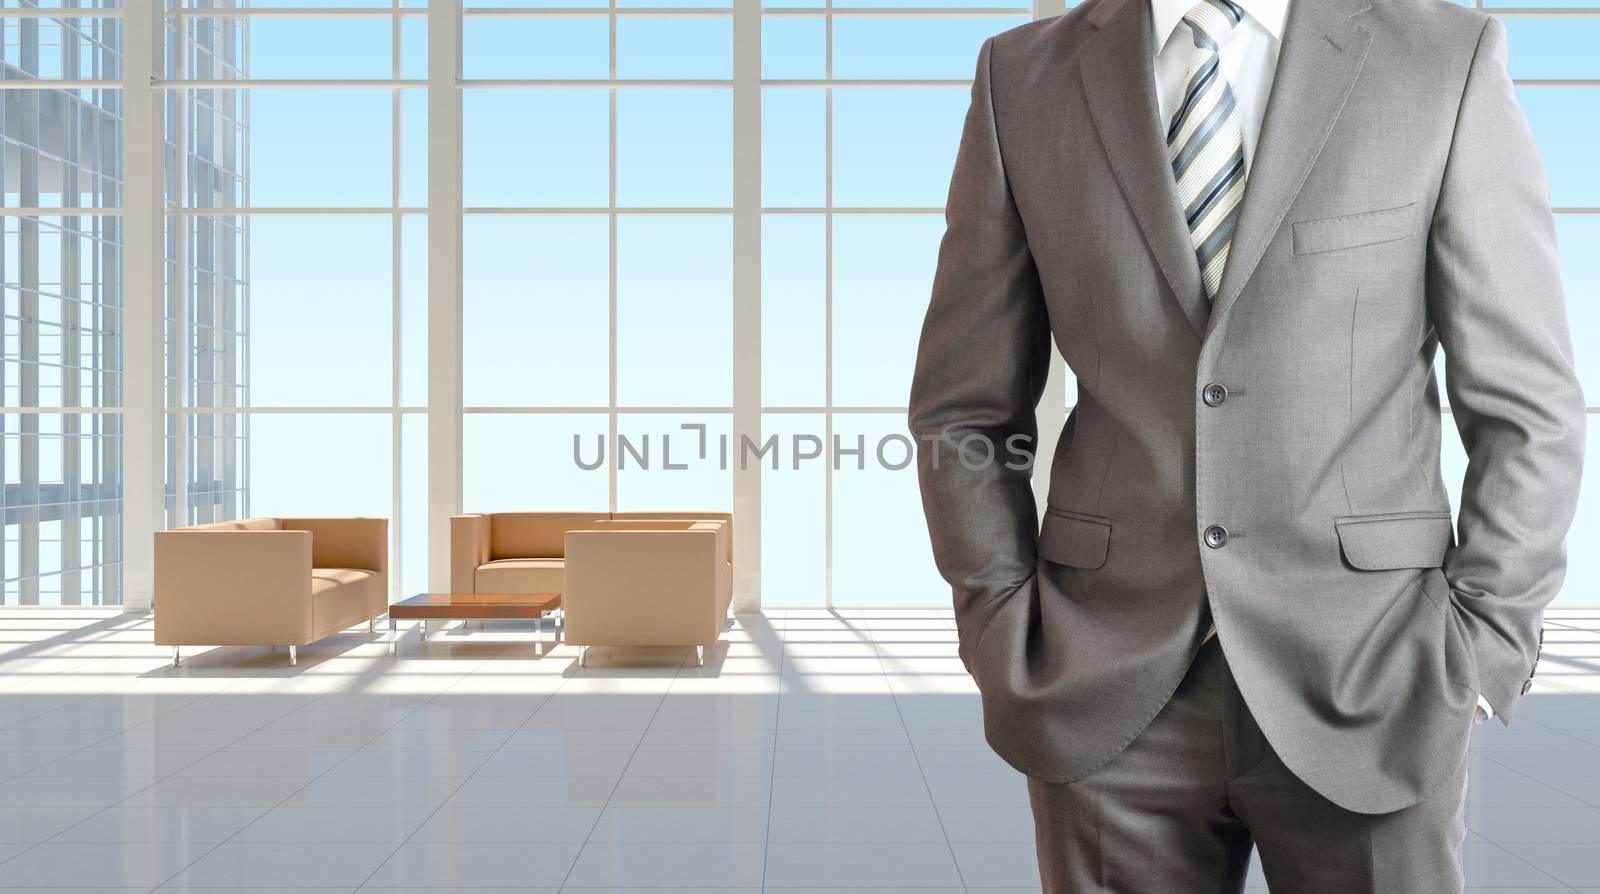 Businessman wearing a suit. Large window in office building as background